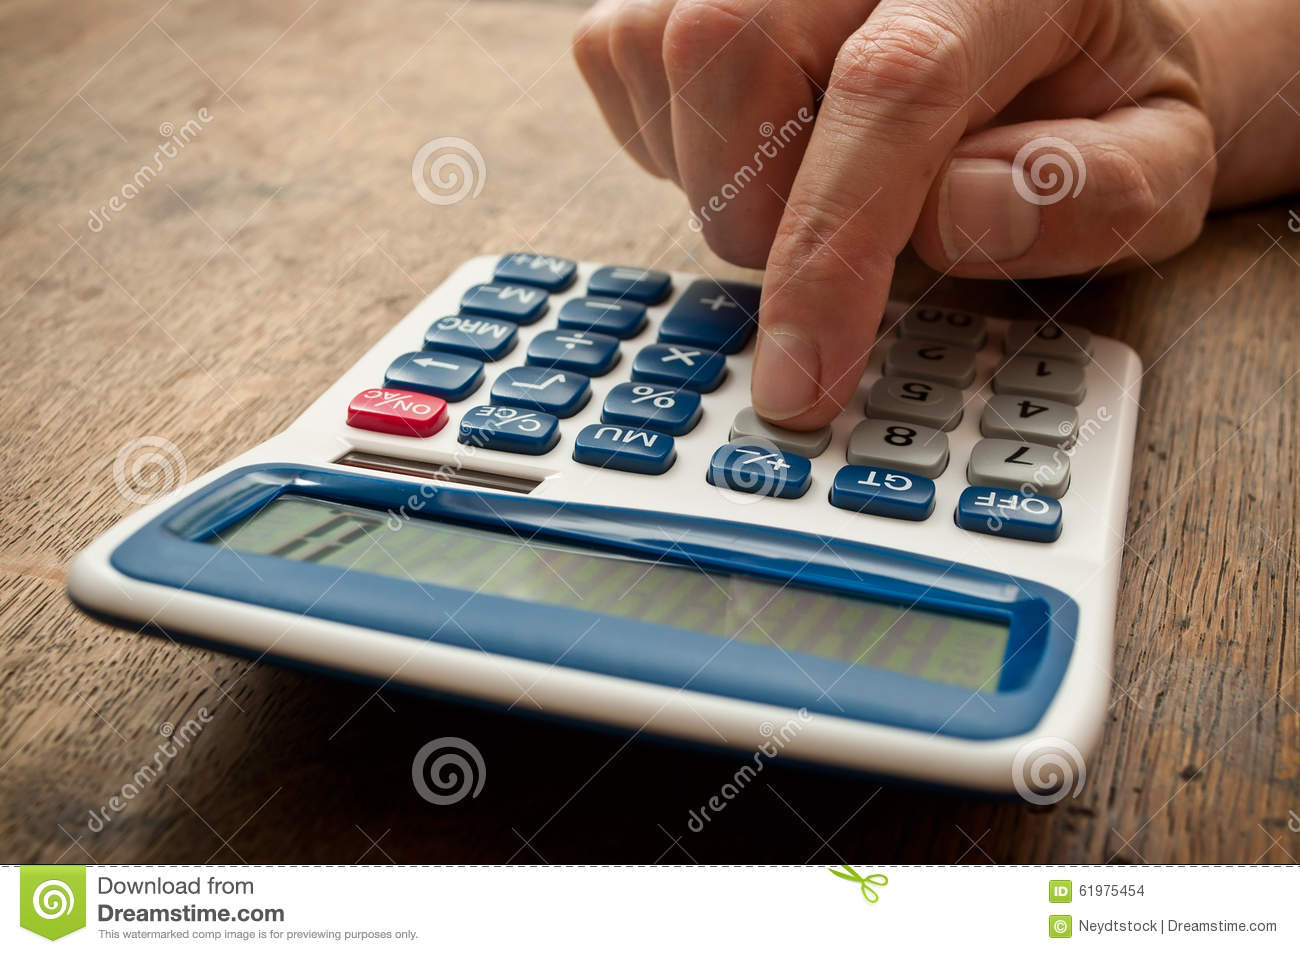 Closeup Oh Hand With Calculator On Wooden Desk Background